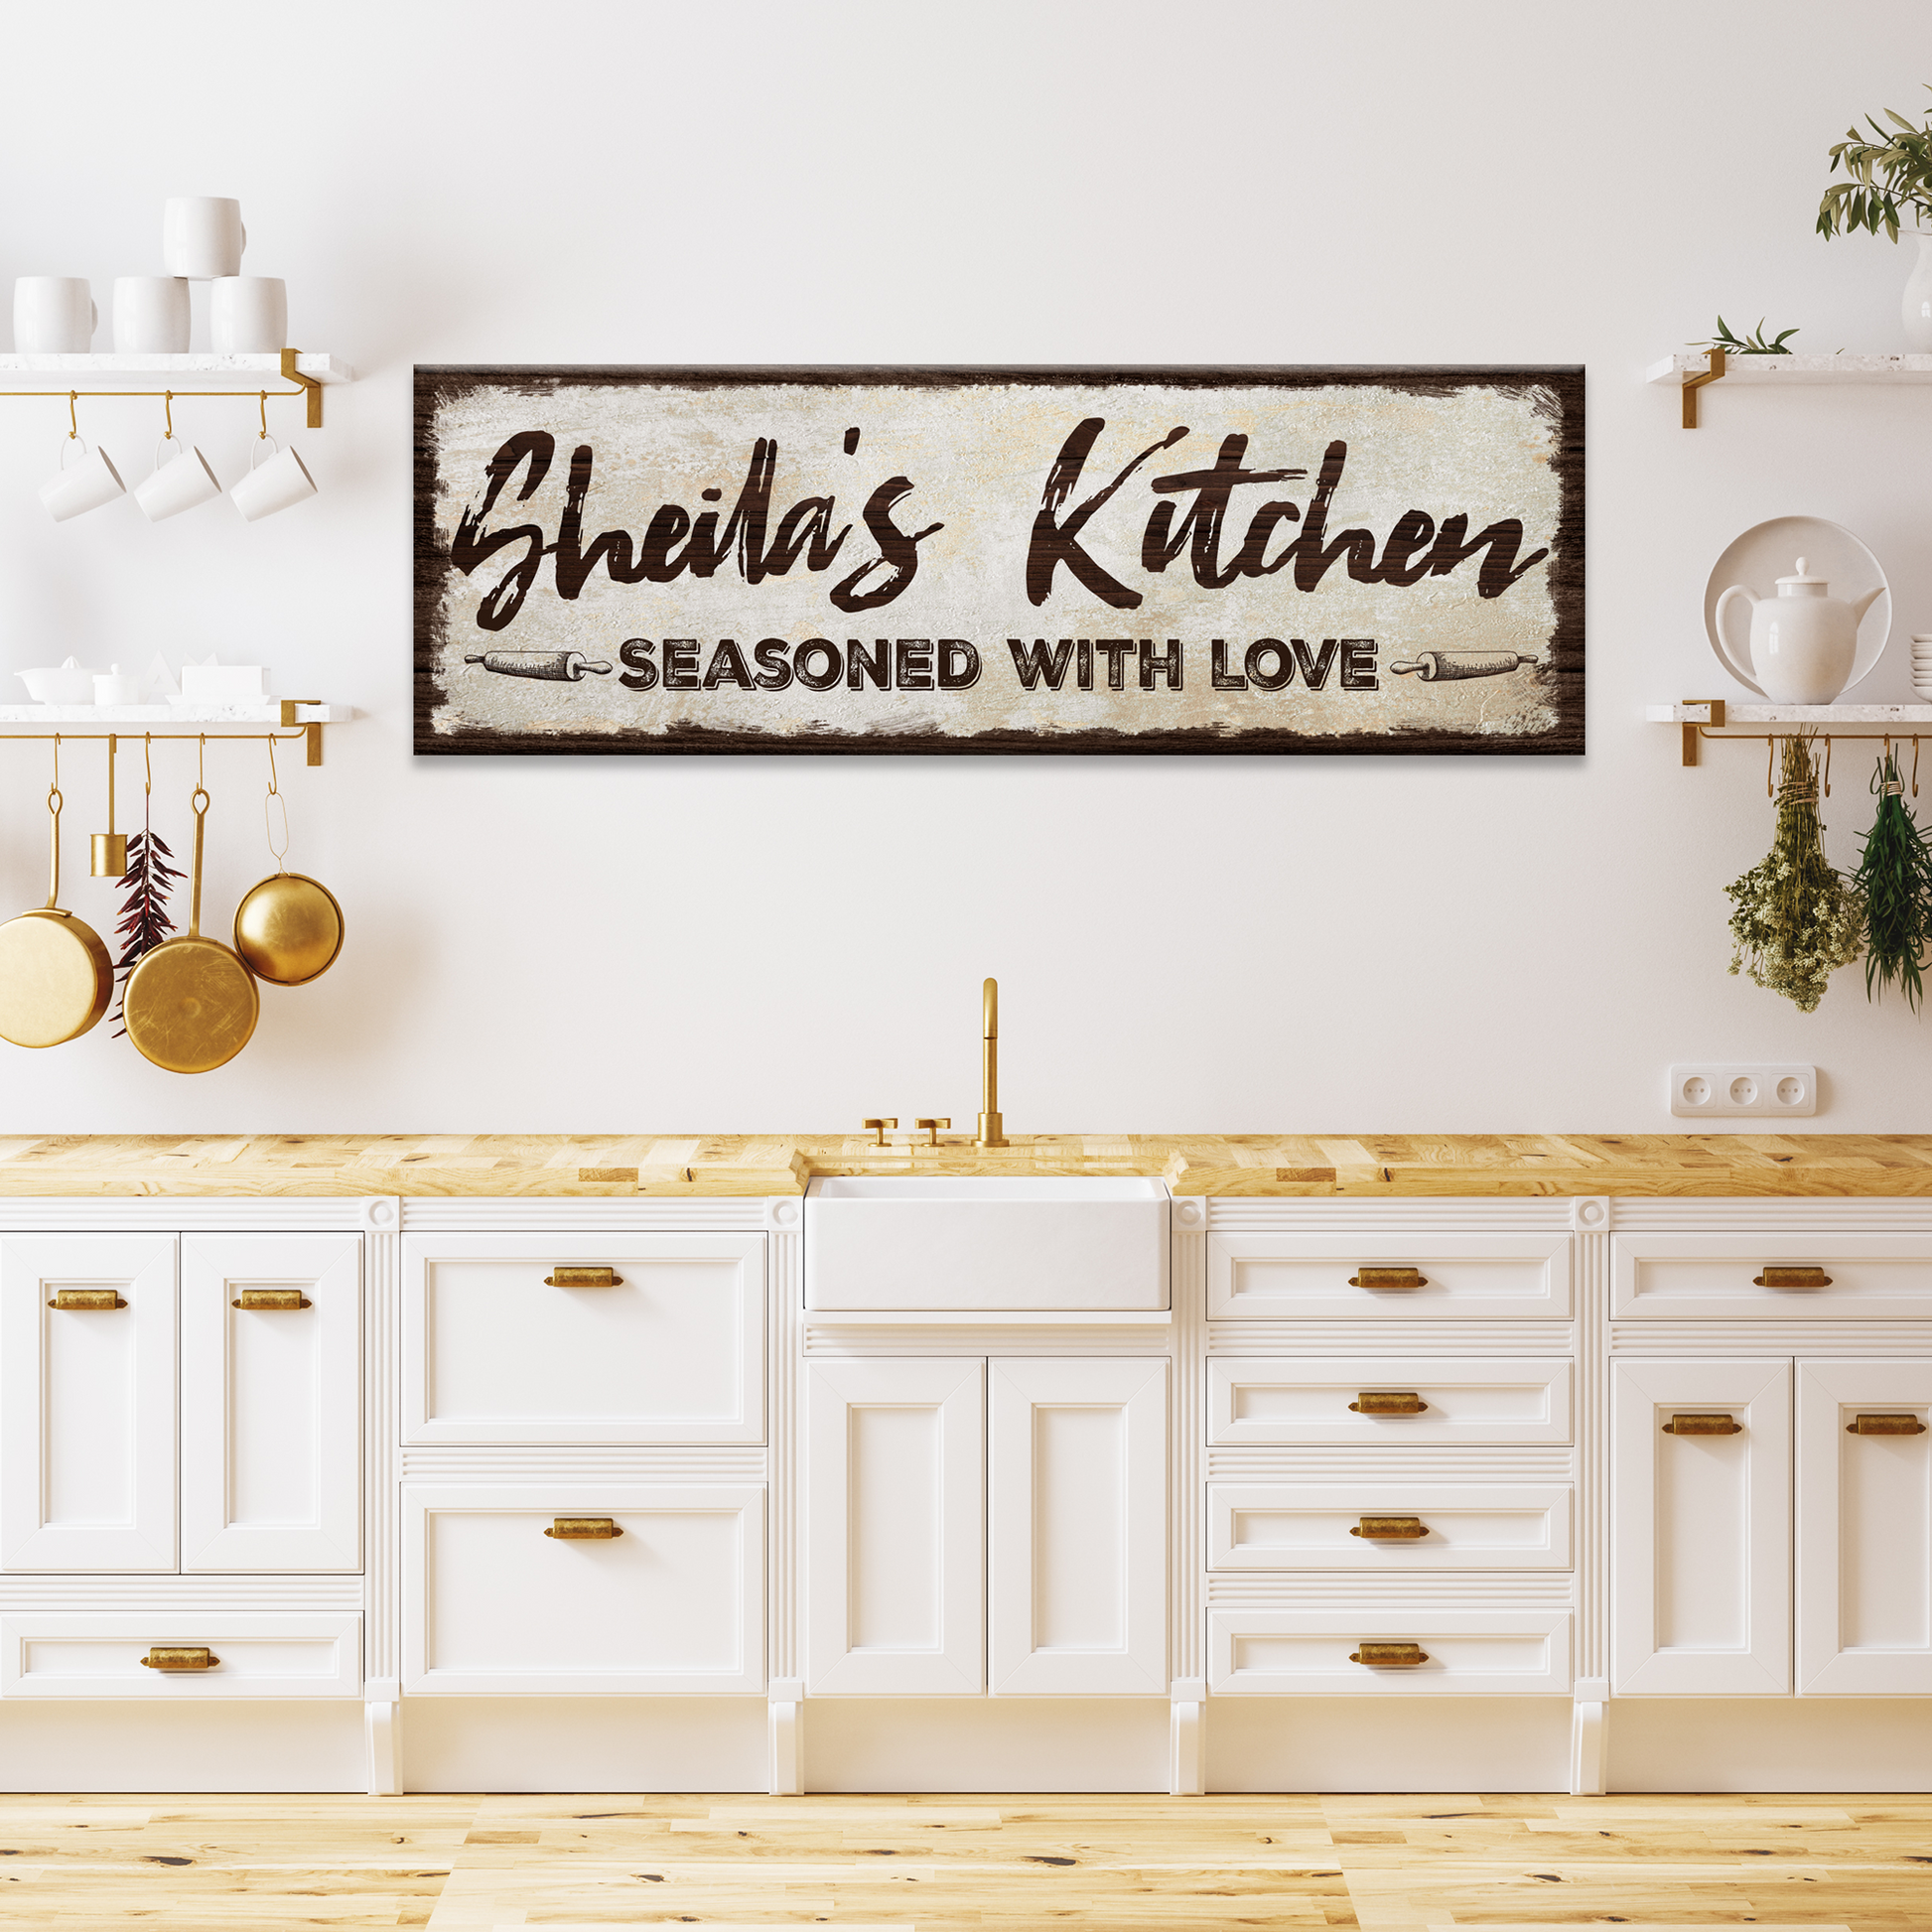 Seasoned with Love Kitchen Sign - Image by Tailored Canvases